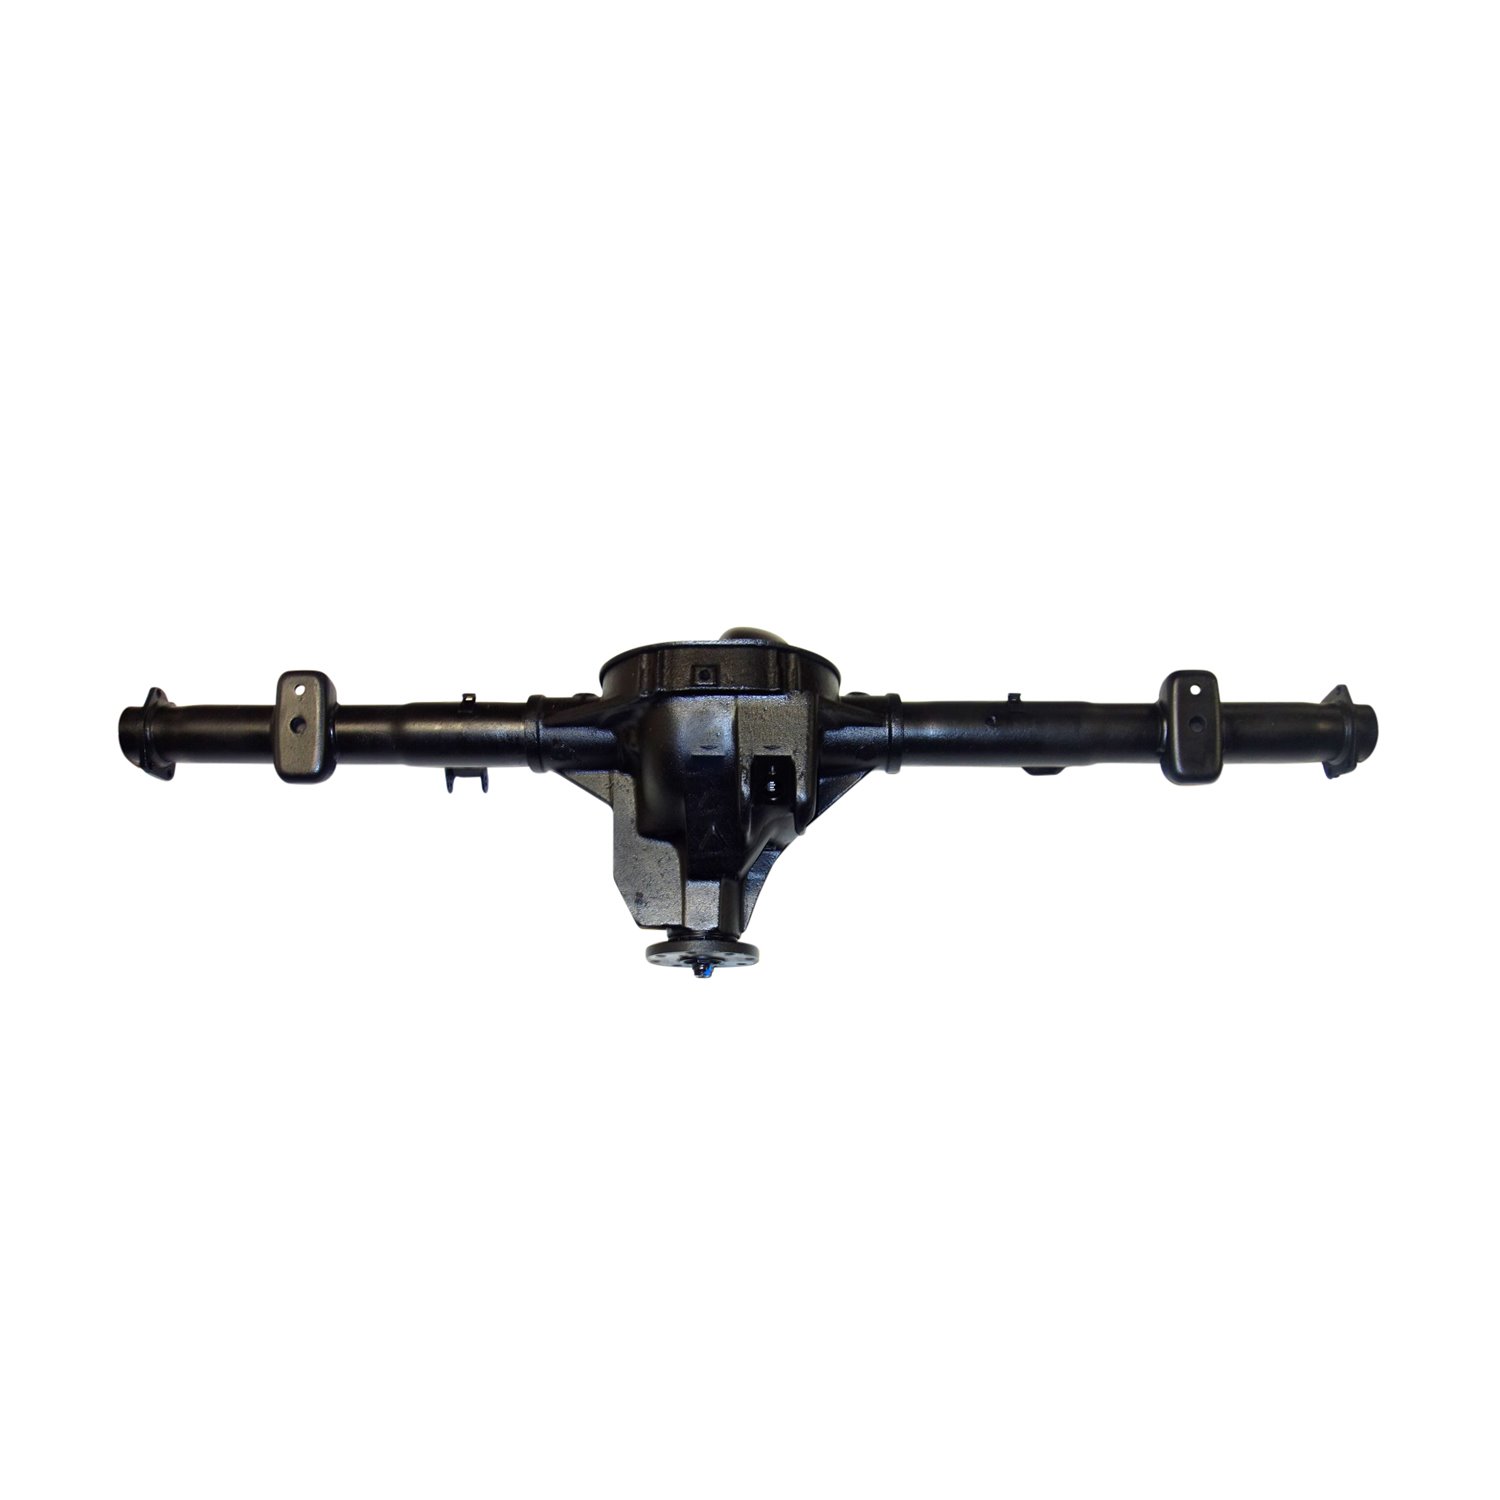 Remanufactured Complete Axle Assembly for 8.8" 98-08 Ranger 4.56 , 10" Drum Brakes